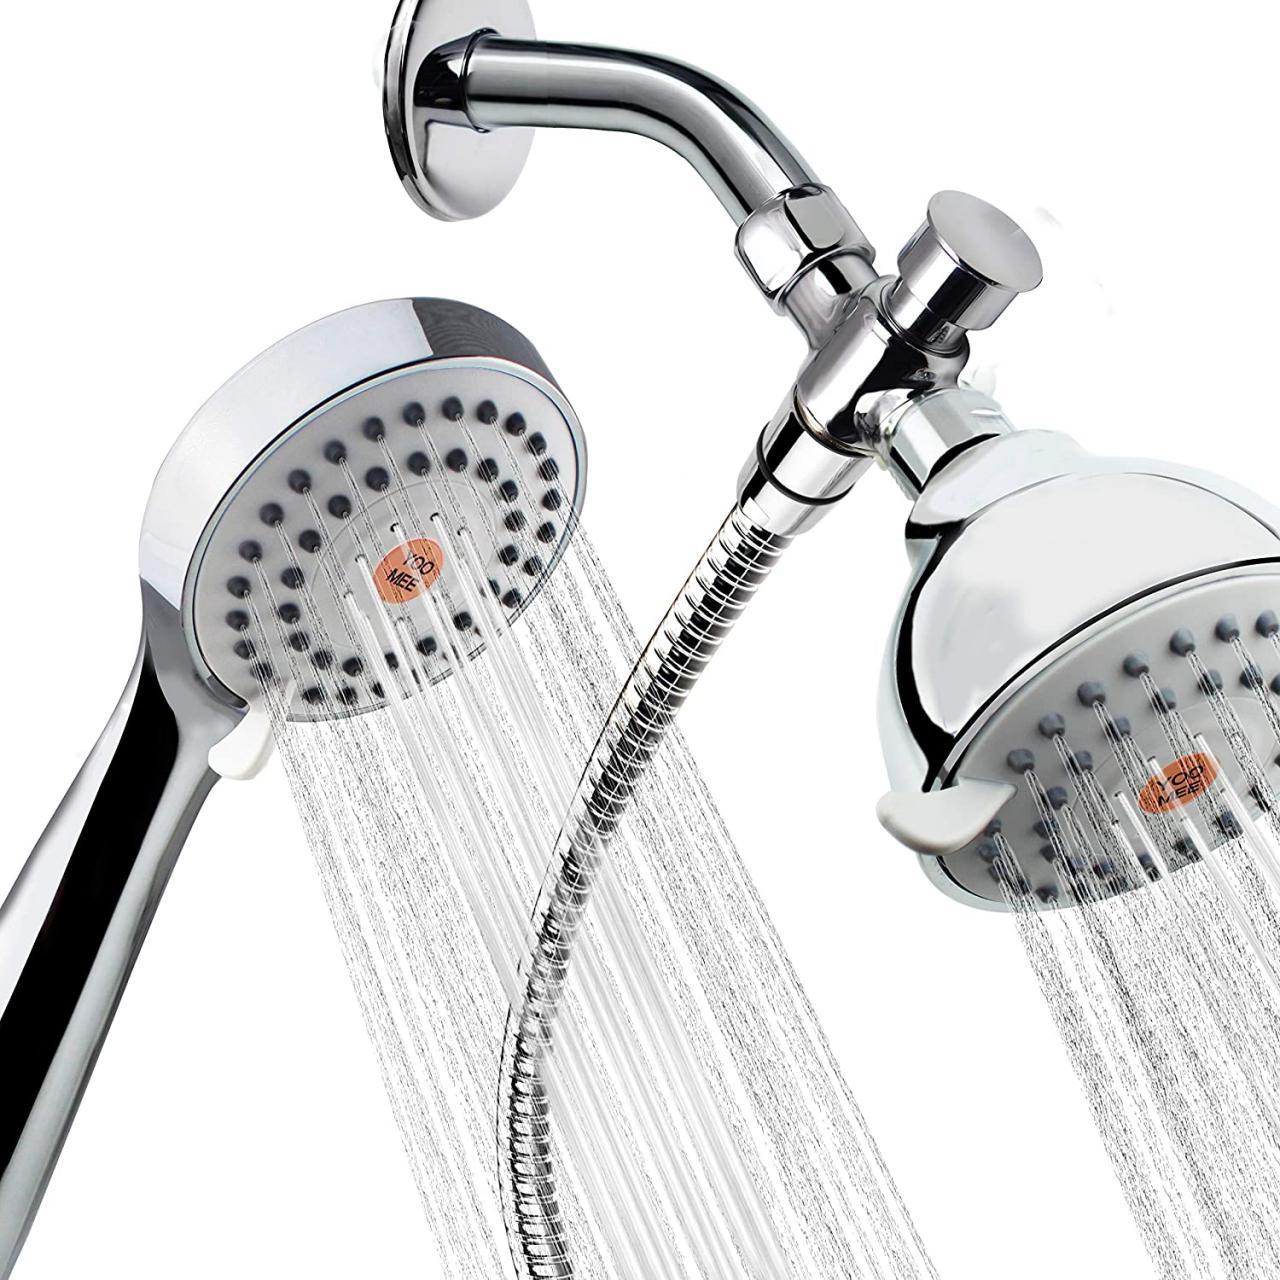 Buy YOO.MEE High Pressure Handheld Shower Head with Powerful Shower Spray  against Low Pressure Water Supply Pipeline, Multi-functions, Bathroom  Accessories w/Hose, Bracket, and Teflon Tape- Chrome in Cheap Price on  Alibaba.com